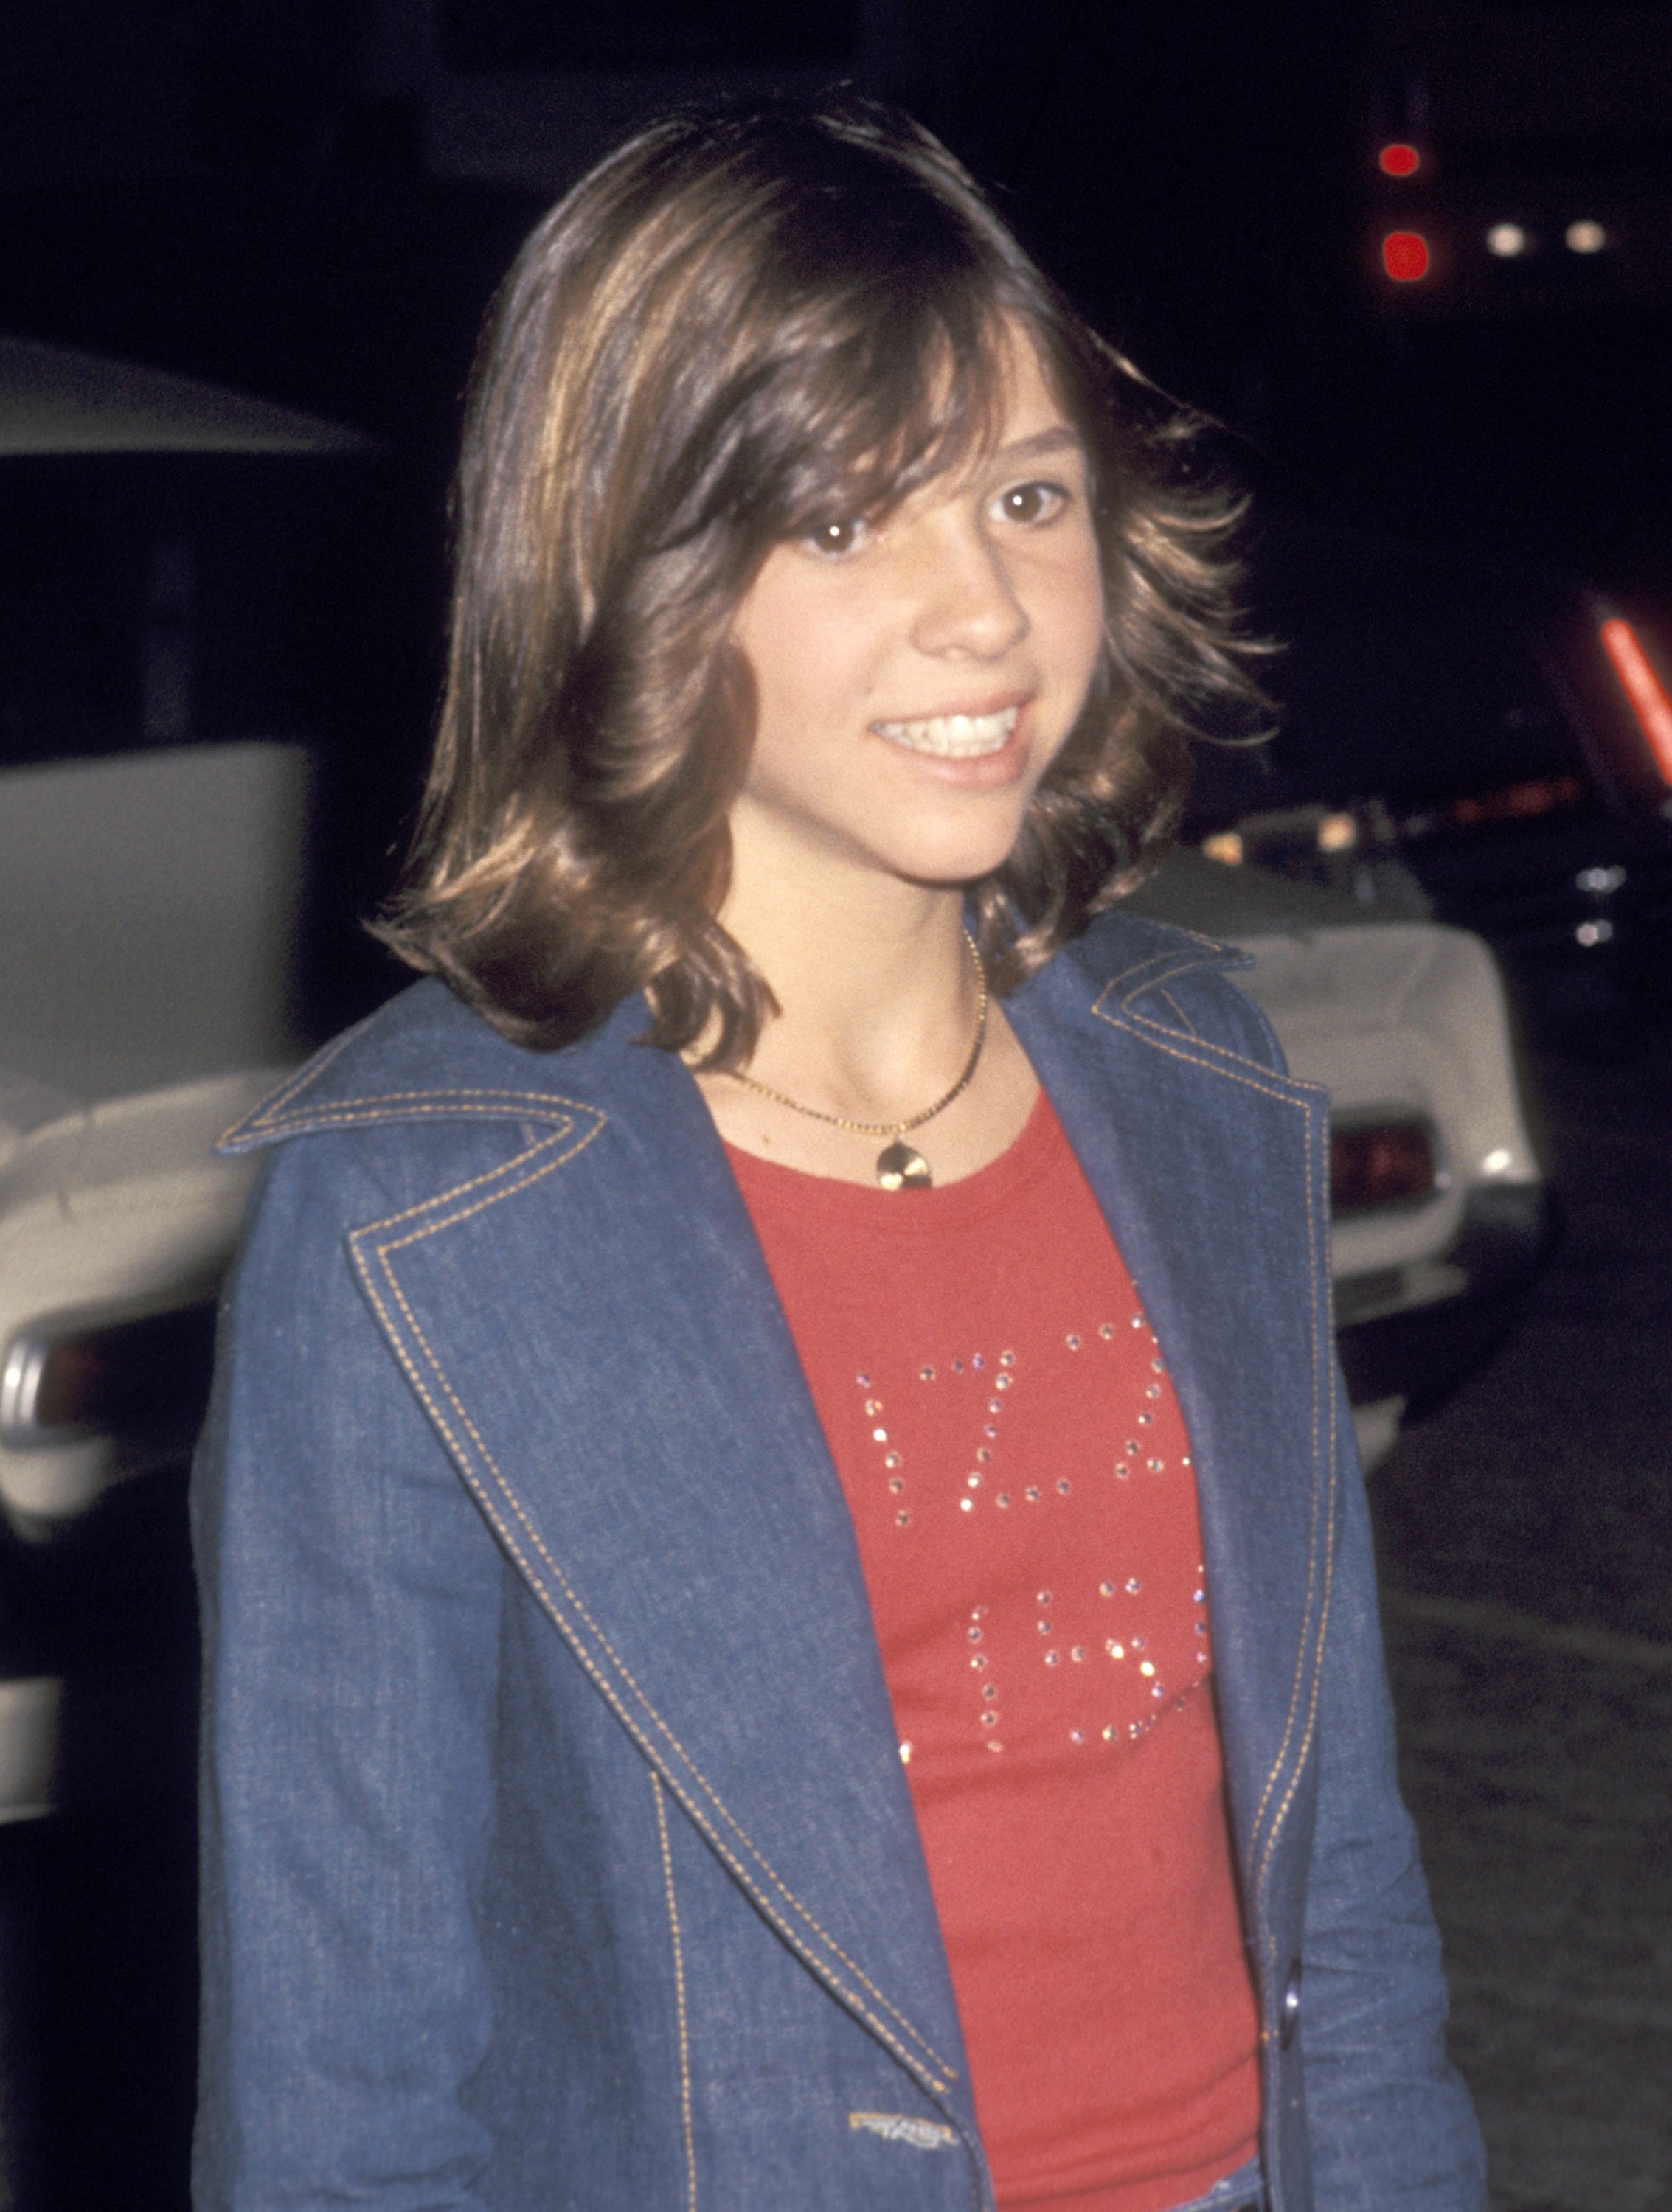 Kristy McNichol at the taping of "The Merv Griffin Show" on April 19, 1977, in Hollywood, California. | Source: Ron Galella, Ltd/Ron Galella Collection/Getty Images